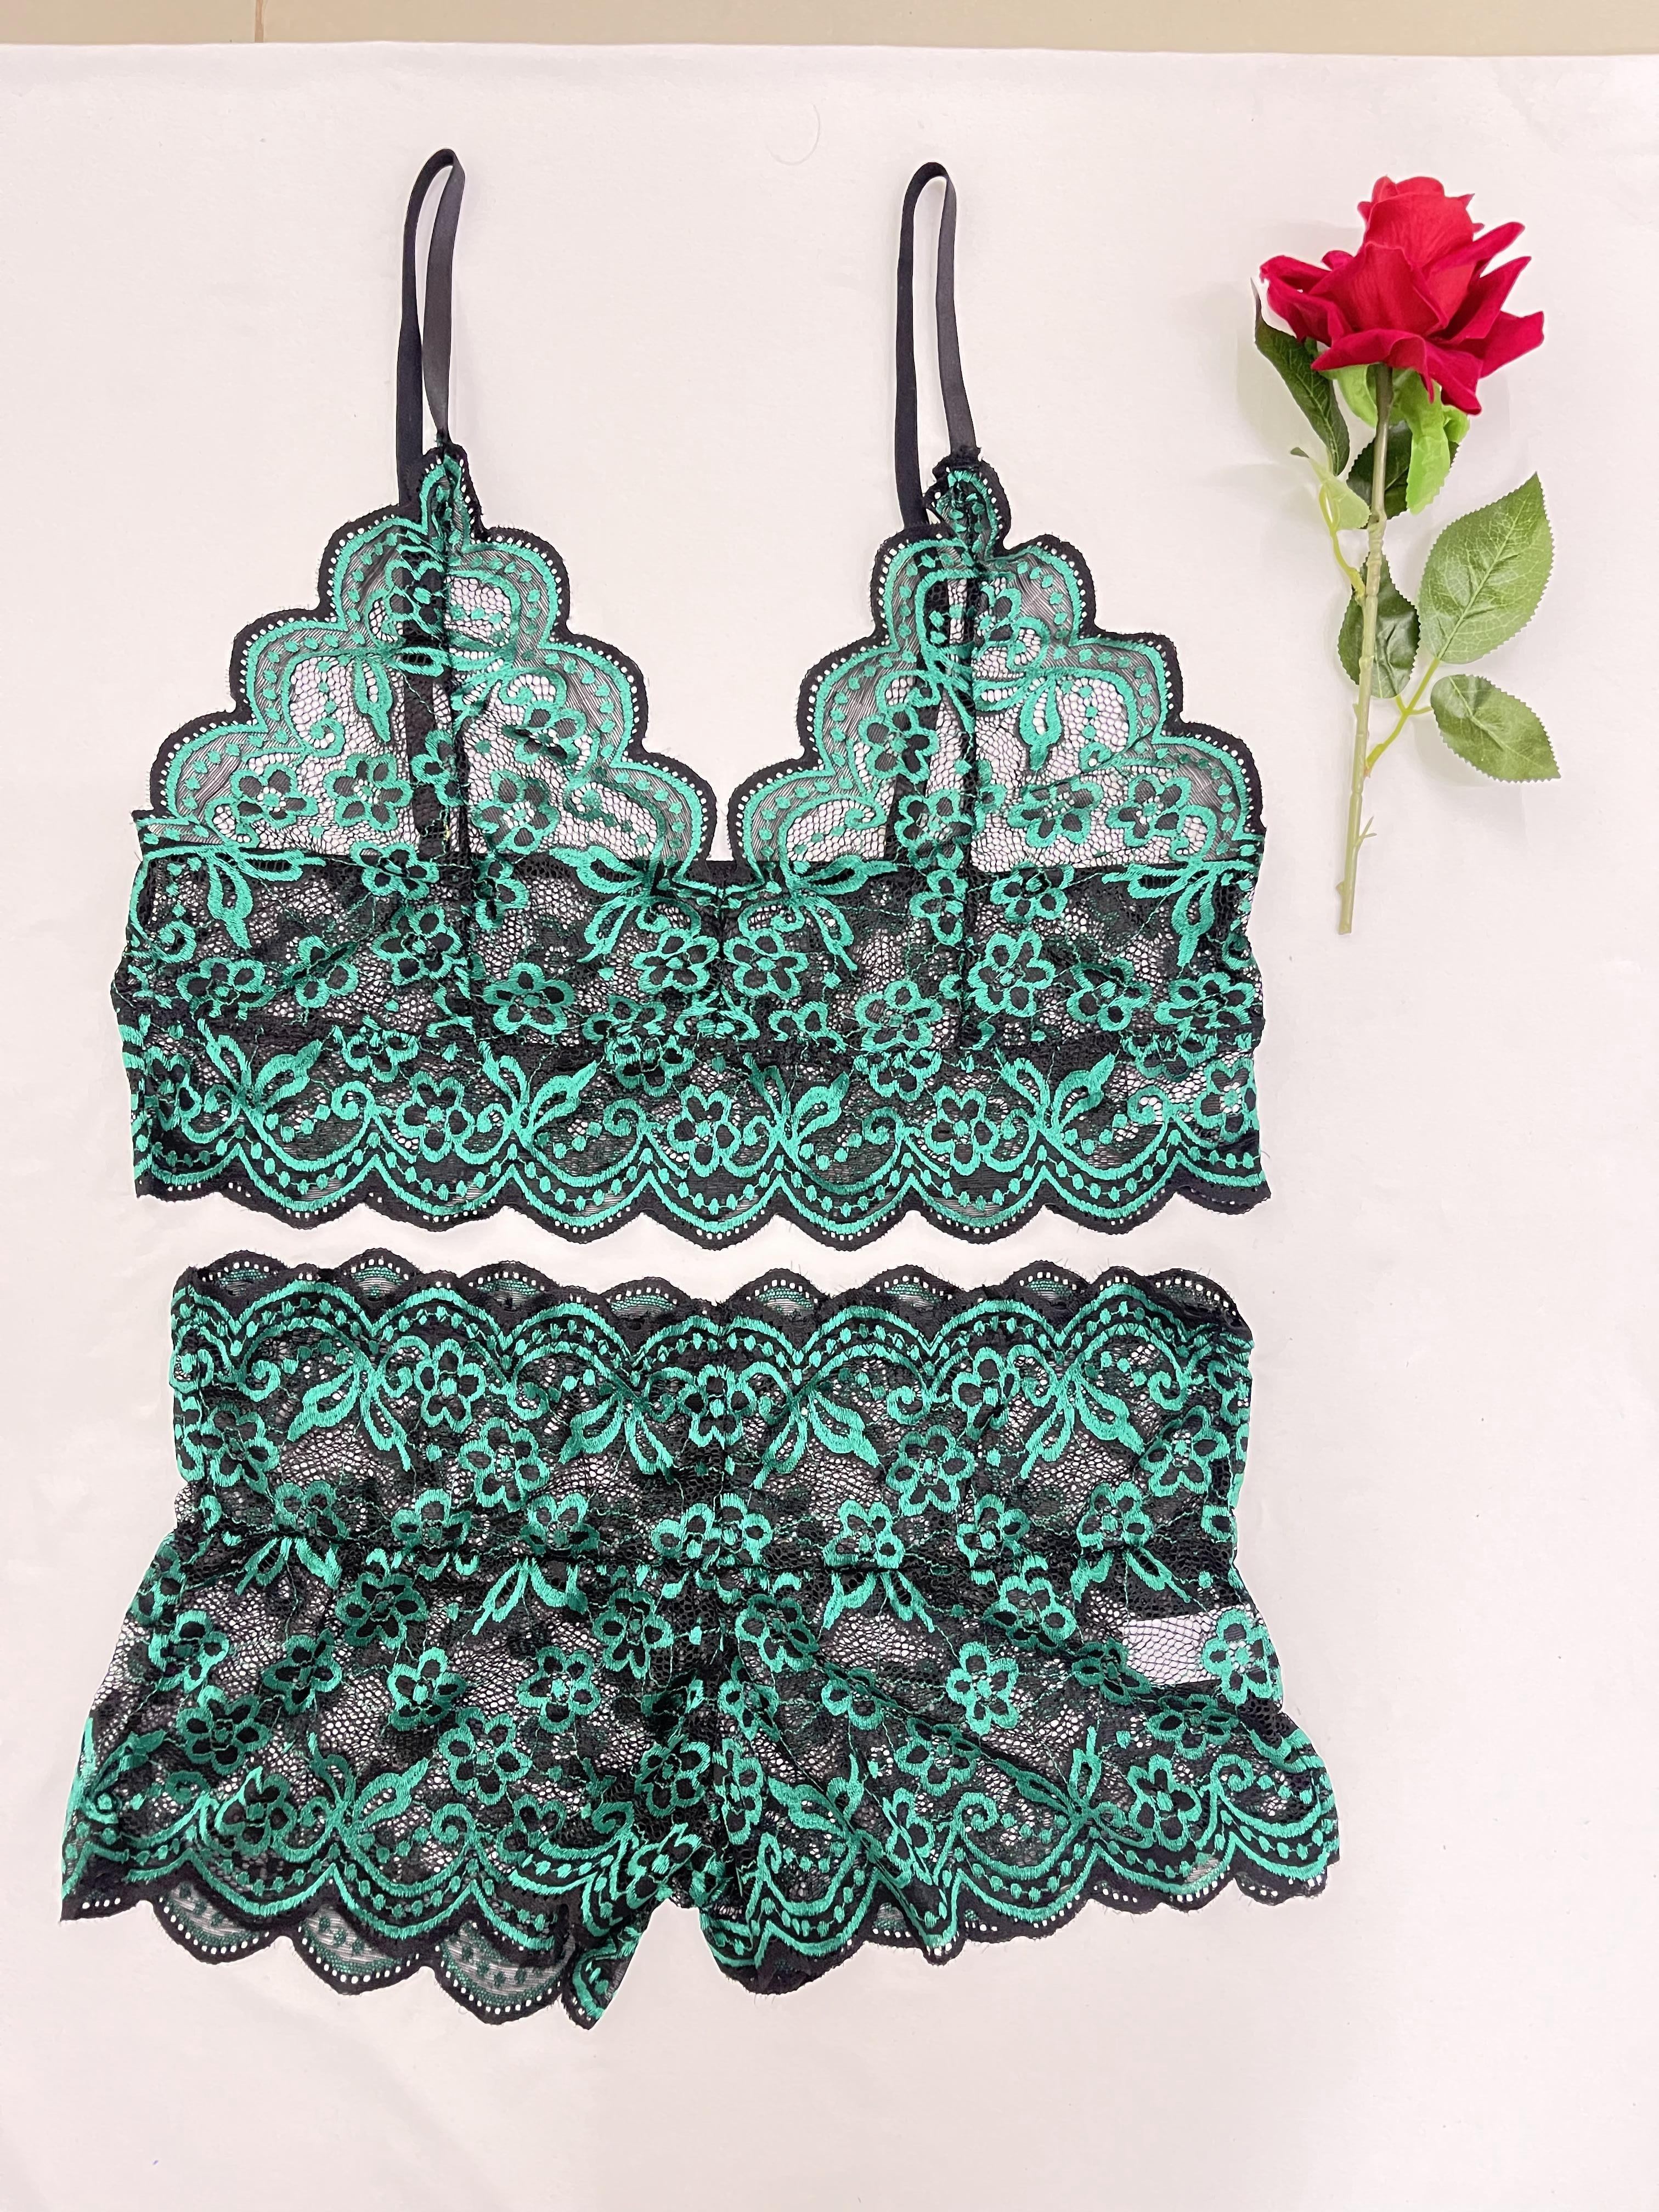 ZYIA, Intimates & Sleepwear, Zyia Spring Blossom Luxe Layered Green  Floral Mesh Sport Bras